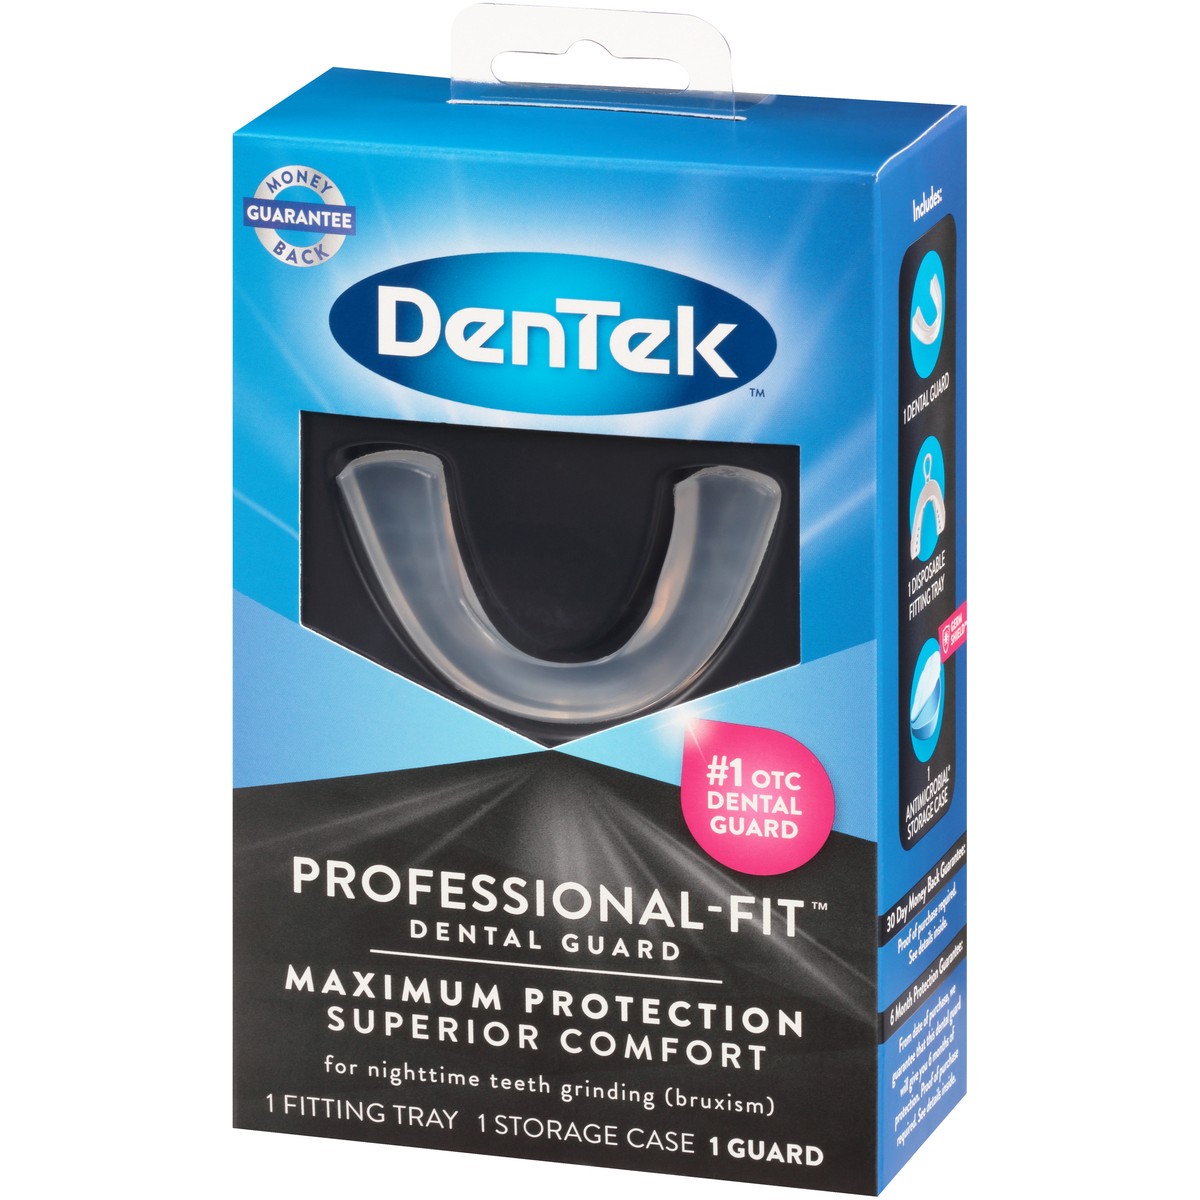 slide 2 of 9, DenTek Professional-Fit Dental Guard for Nighttime Teeth Grinding with Guard, Fitting Tray, & Storage Case, 1 ct